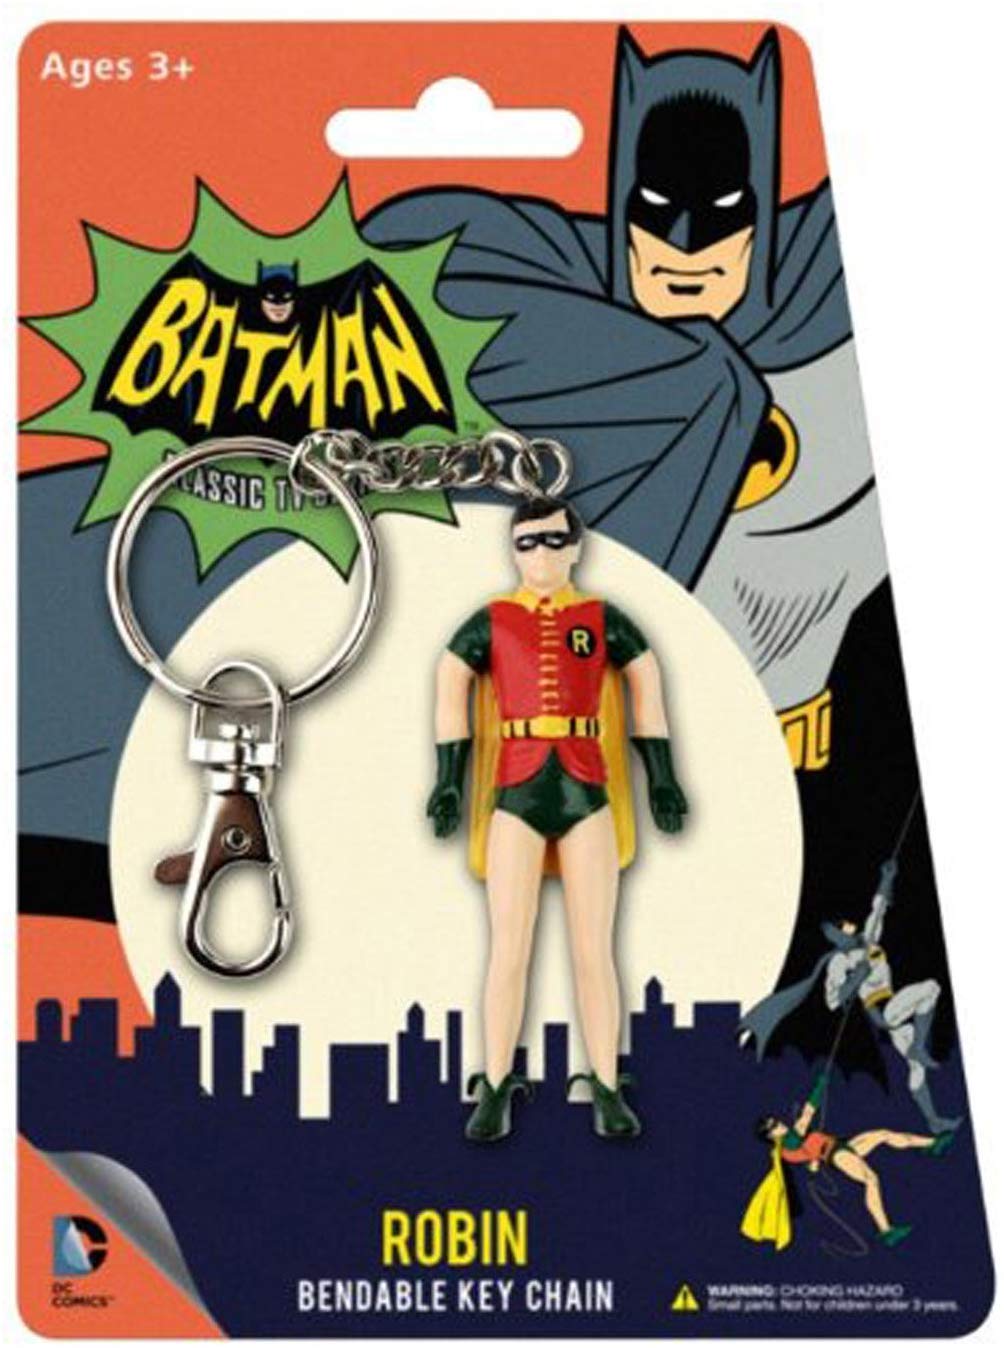 Batman - 1966 Classic TV Series ROBIN Bendable Poseable Keychain - A & D  Products NY Corp. Cool Toy Den